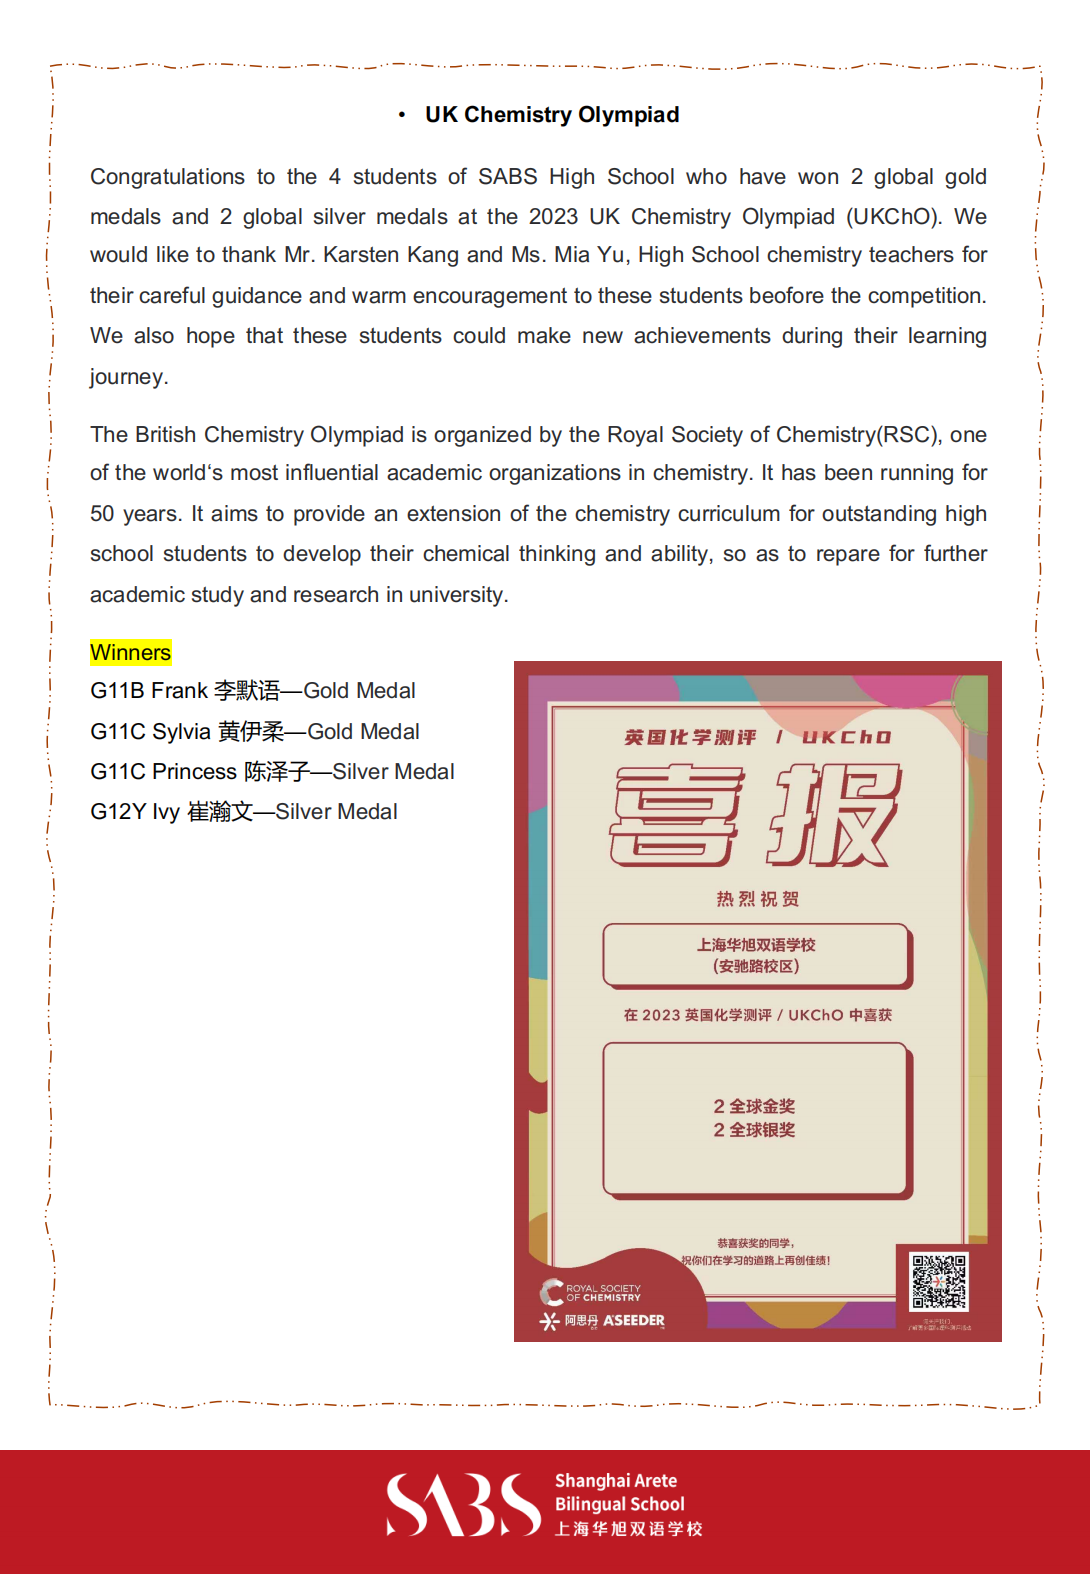 HS 5th Issue Newsletter pptx（English）_14.png